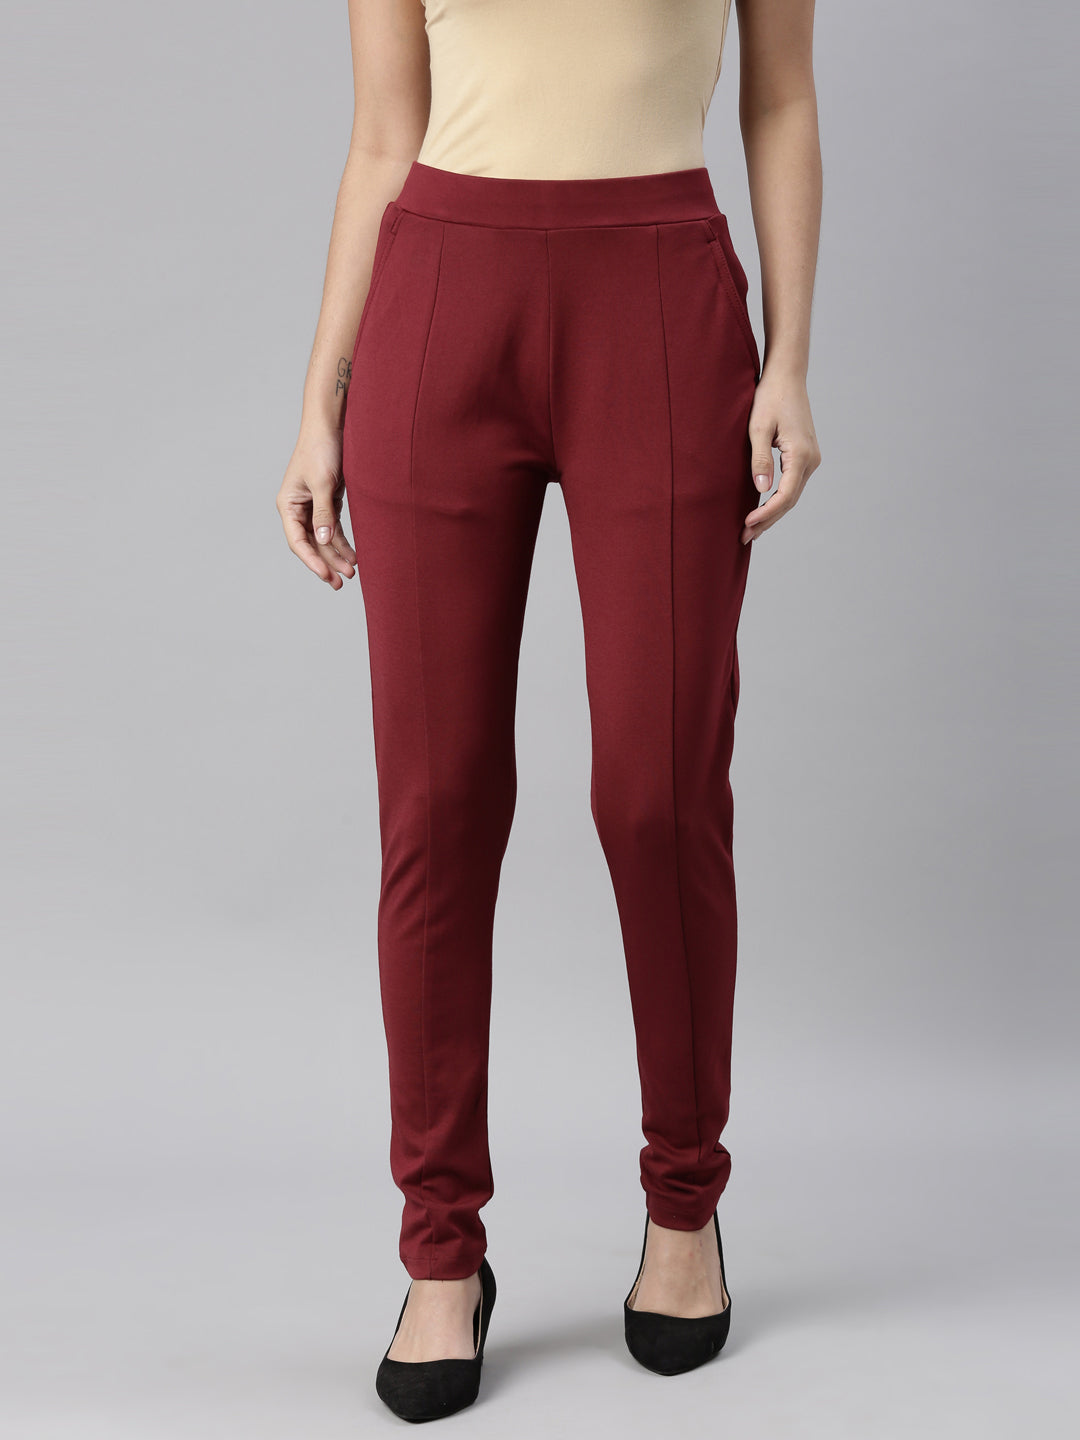 Women Solid Maroon Stretch Ponte Pants